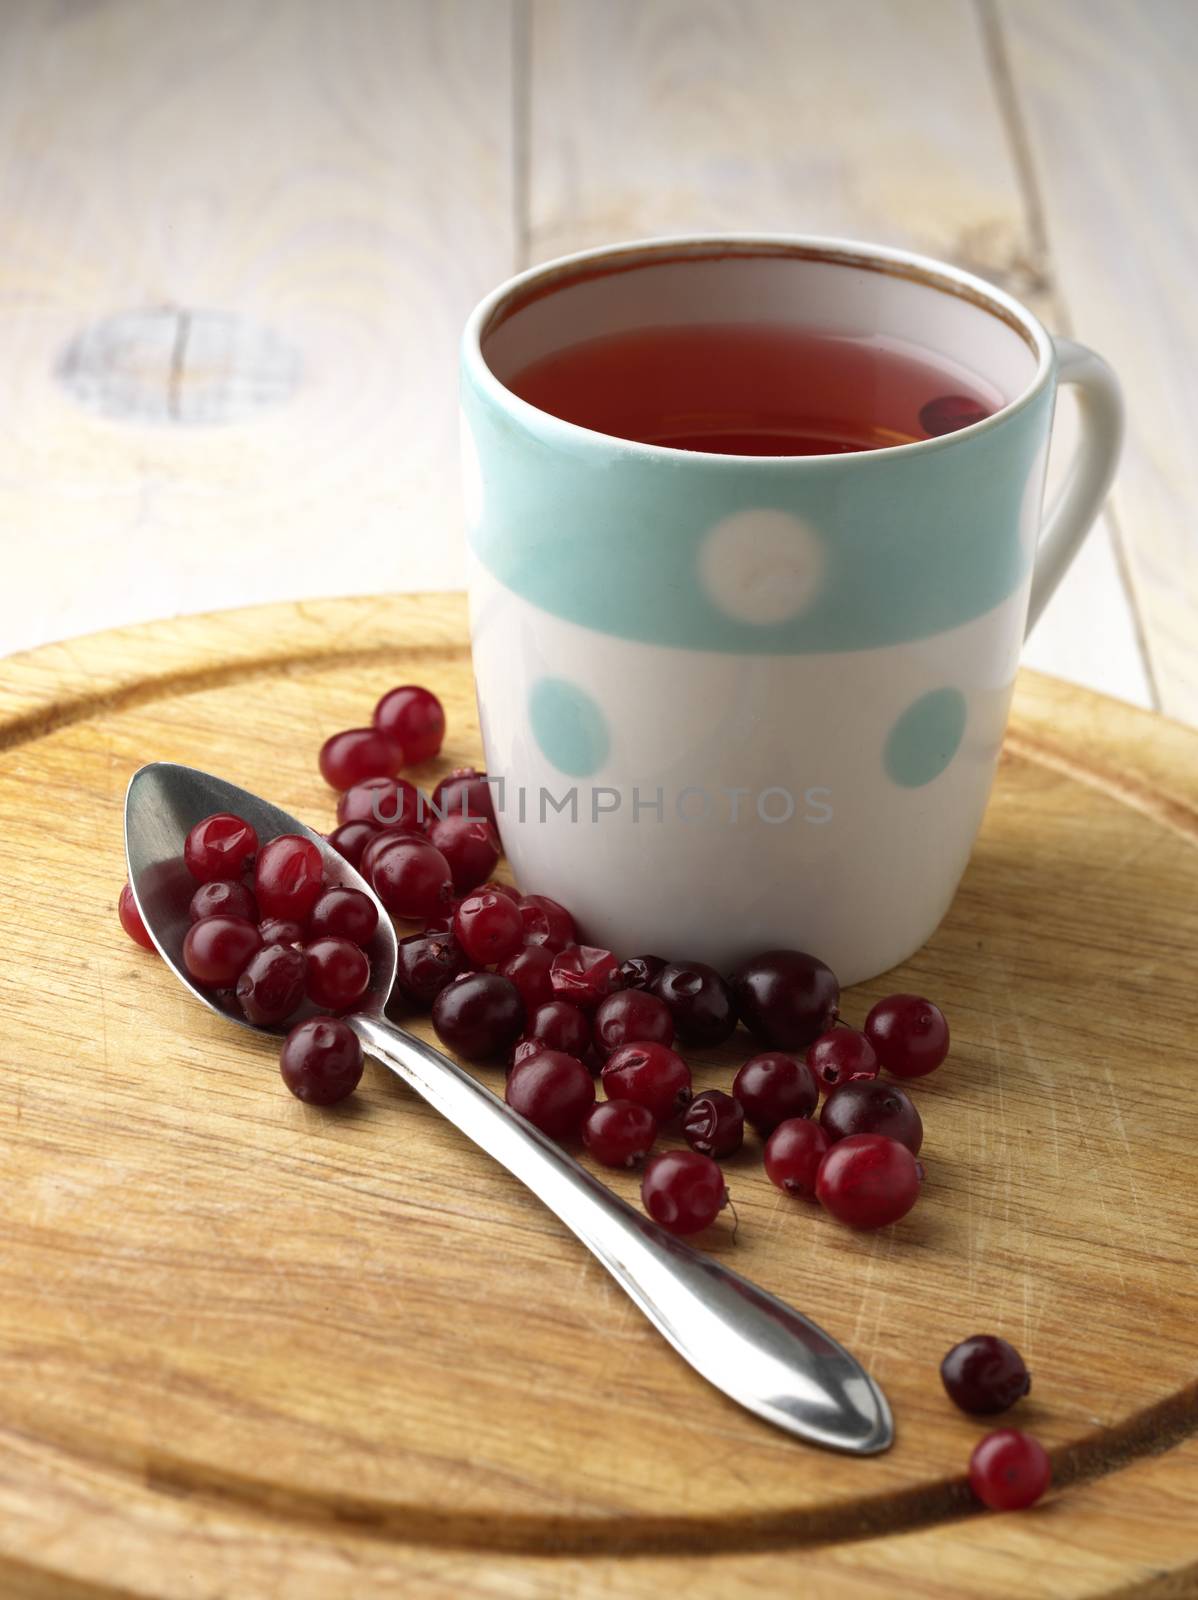 cranberry tea and berry on the wooden table